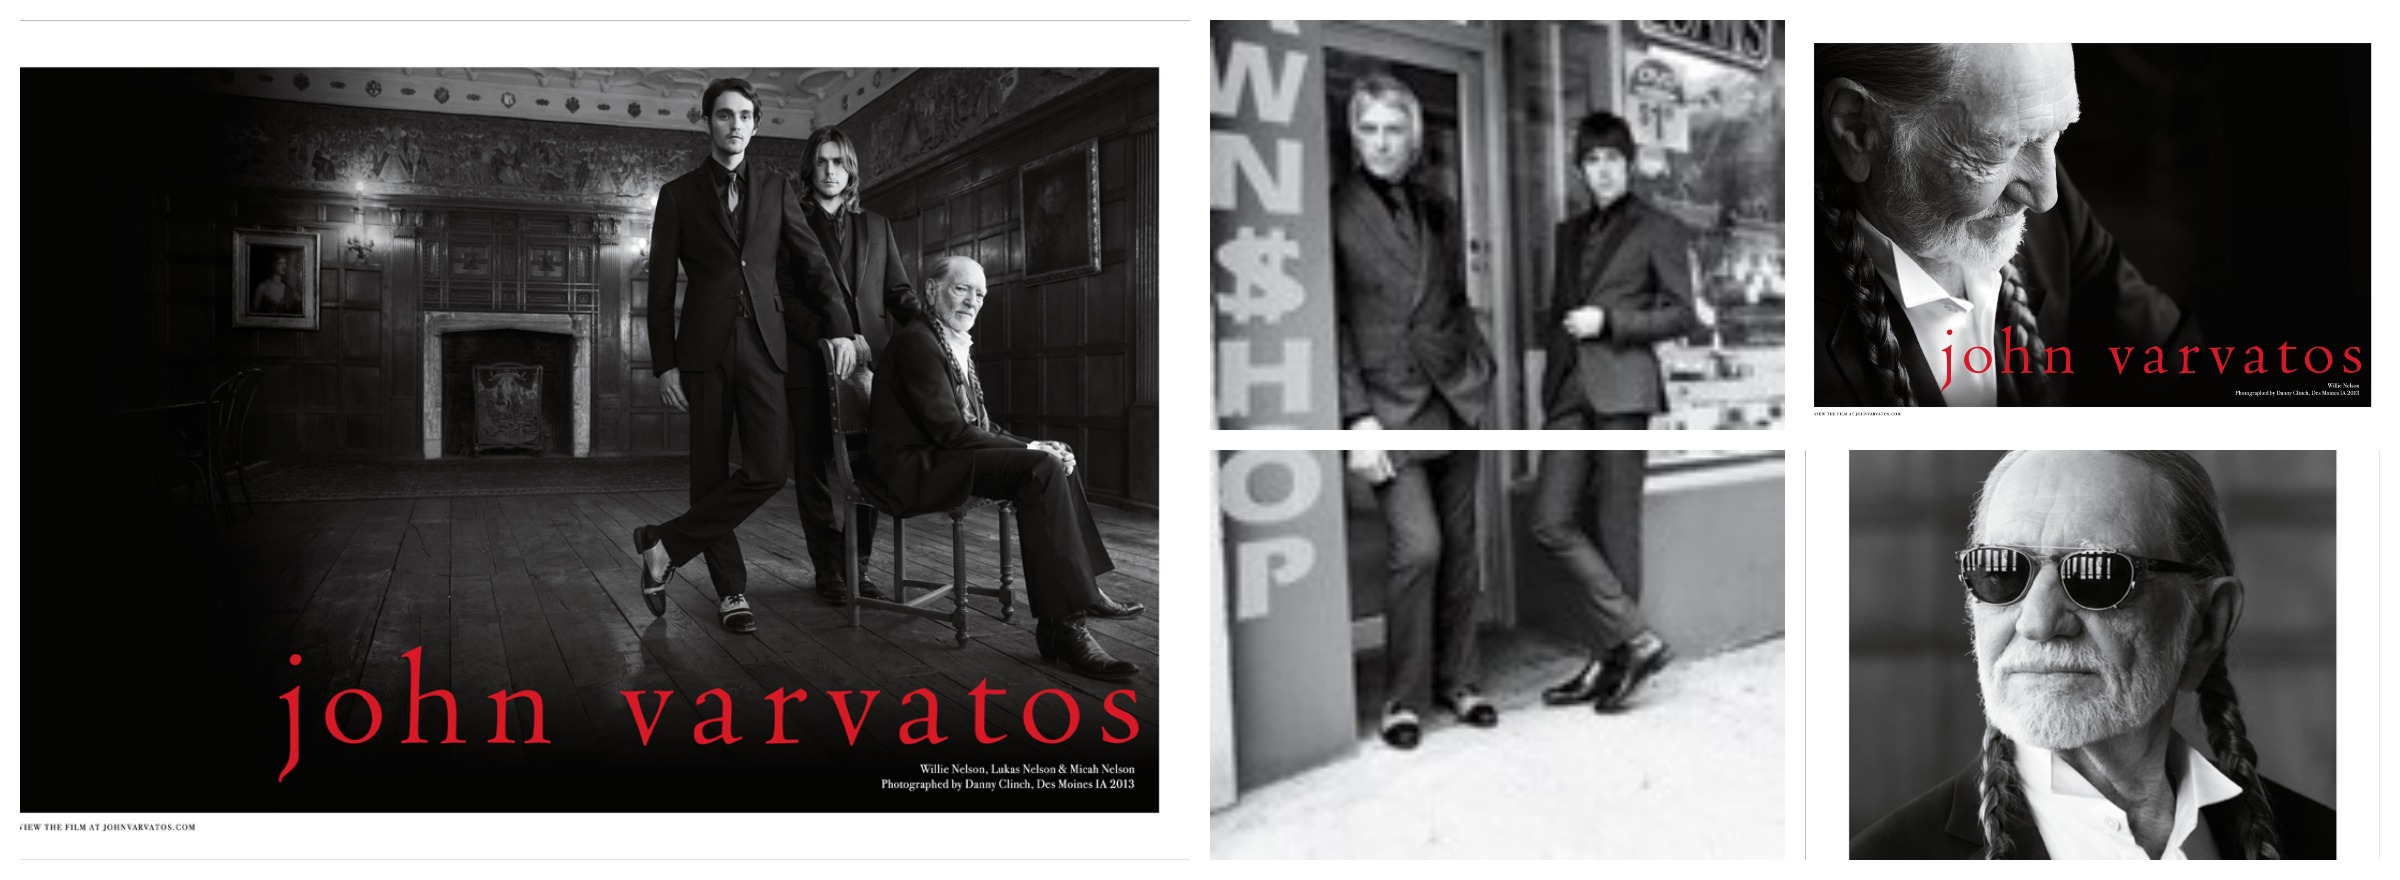 John Varvatos Willie Nelson Promise of the Real Insects vs Robots fall 2013 ad campaign photography images Danny Clinch